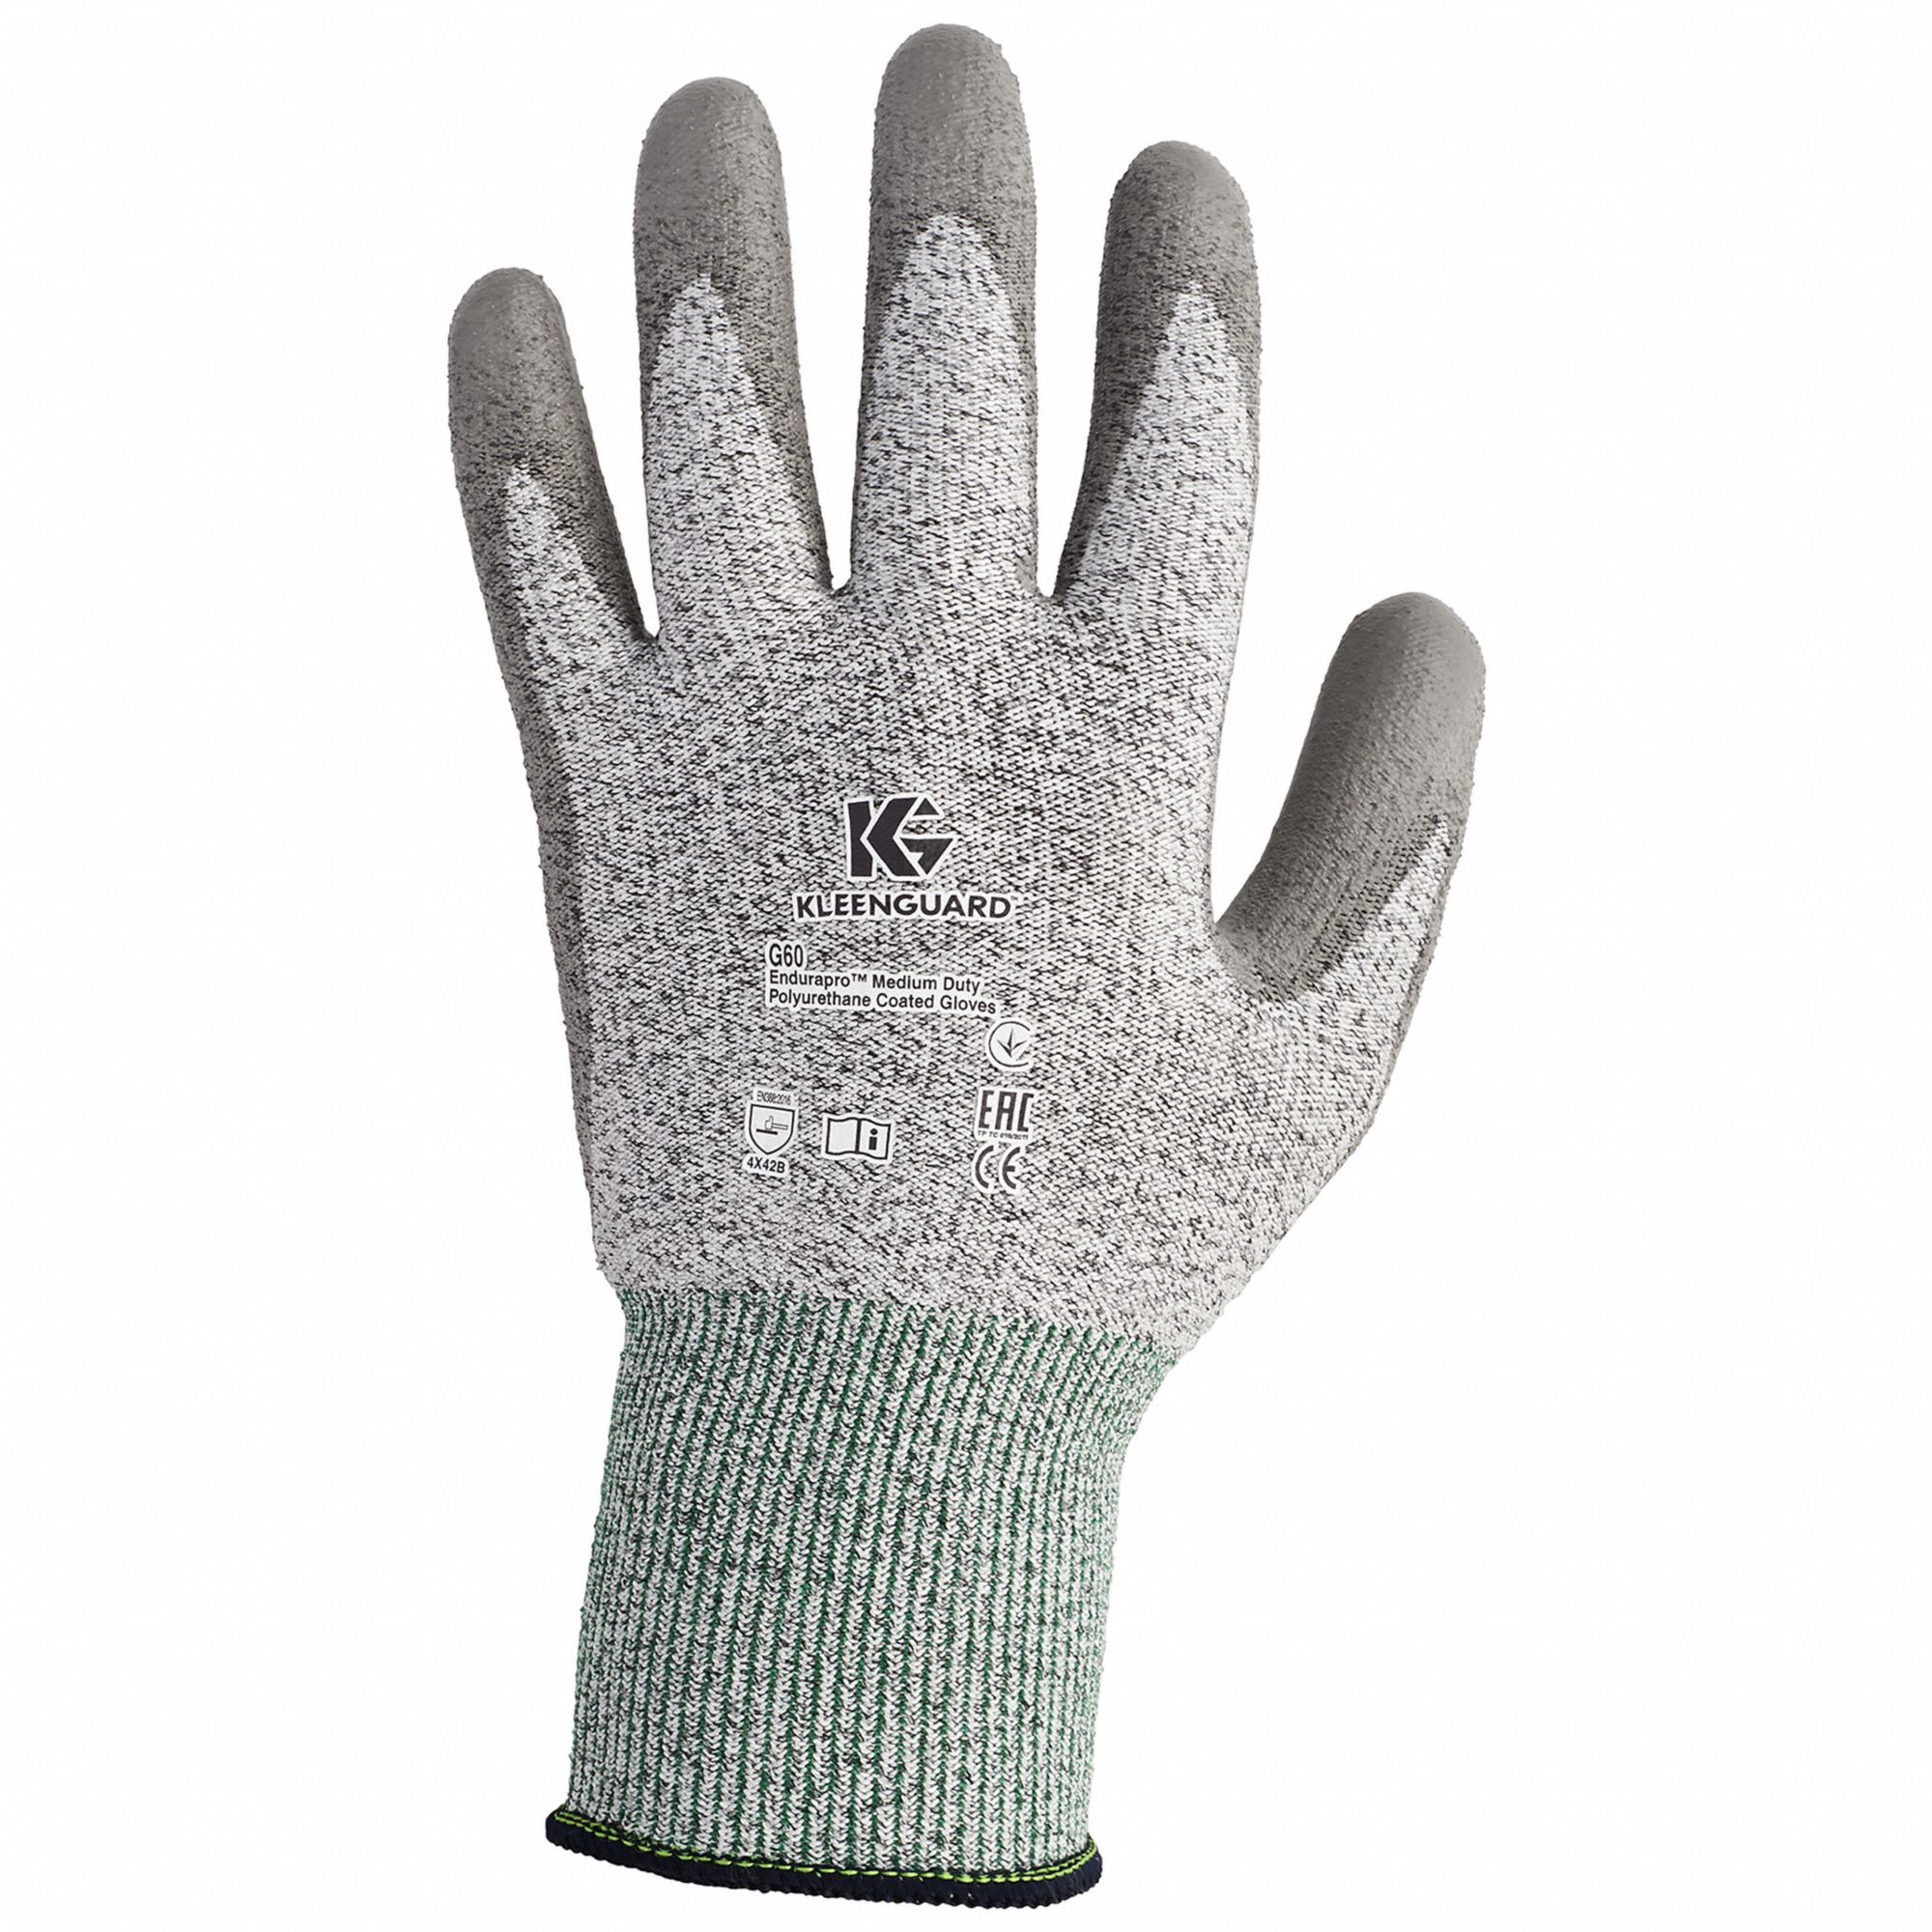 JACKSON SAFETY CUT-RESISTANT GLOVES, L (9), ANSI CUT LEVEL A3, DIPPED PALM,  PUR - Knit Cut-Resistant Gloves - KMB13825